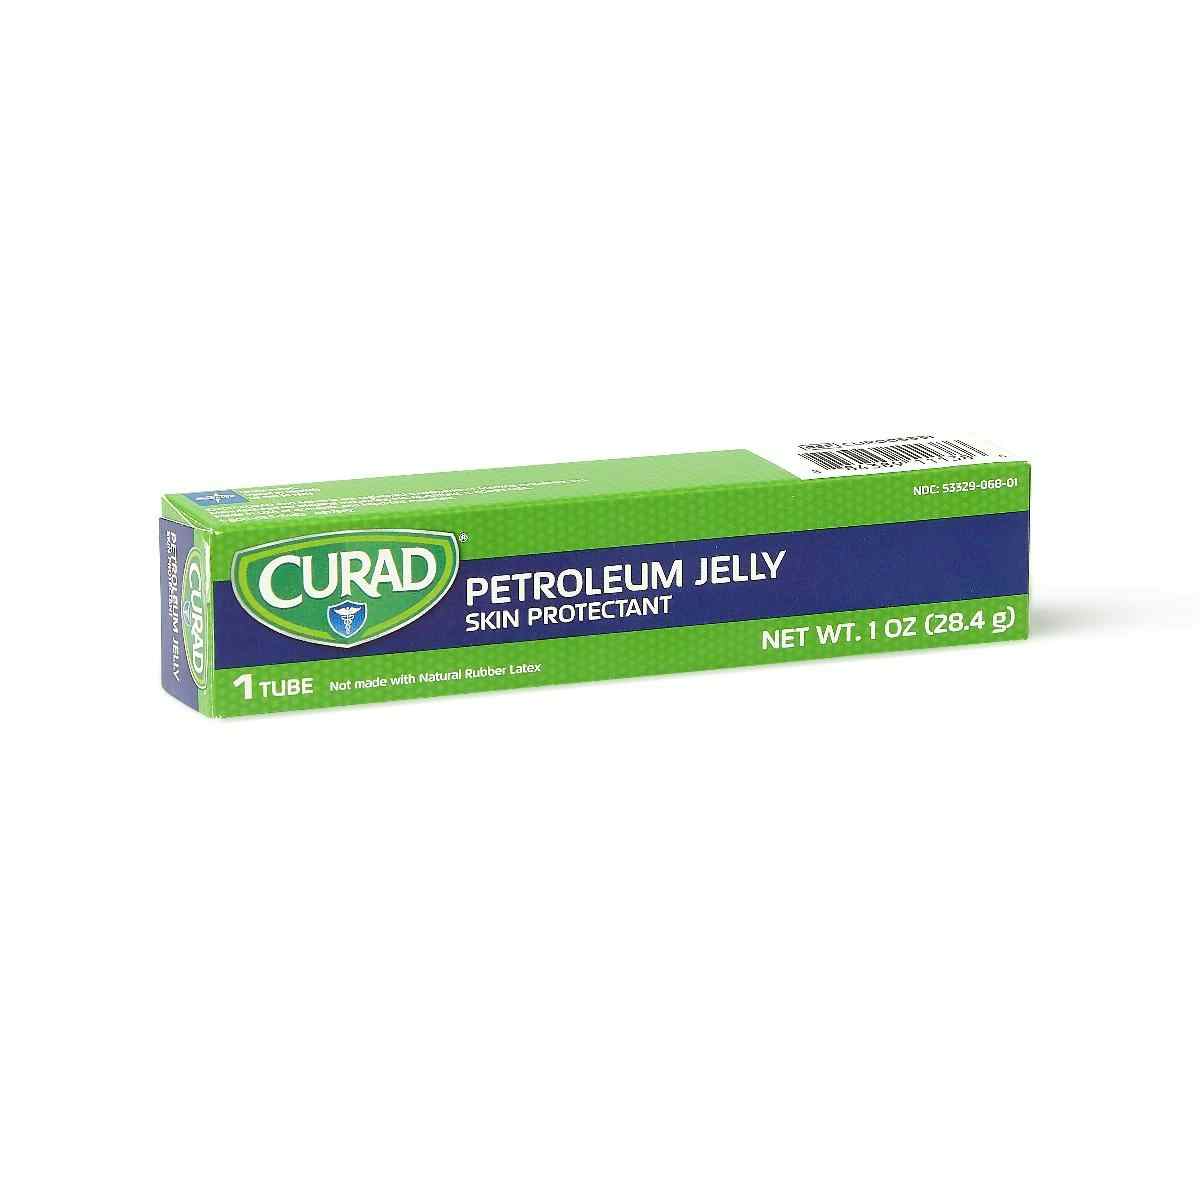 Curad Petroleum Jelly Skin Protectant, CUR005331, 1 oz. Tube - Case of 12